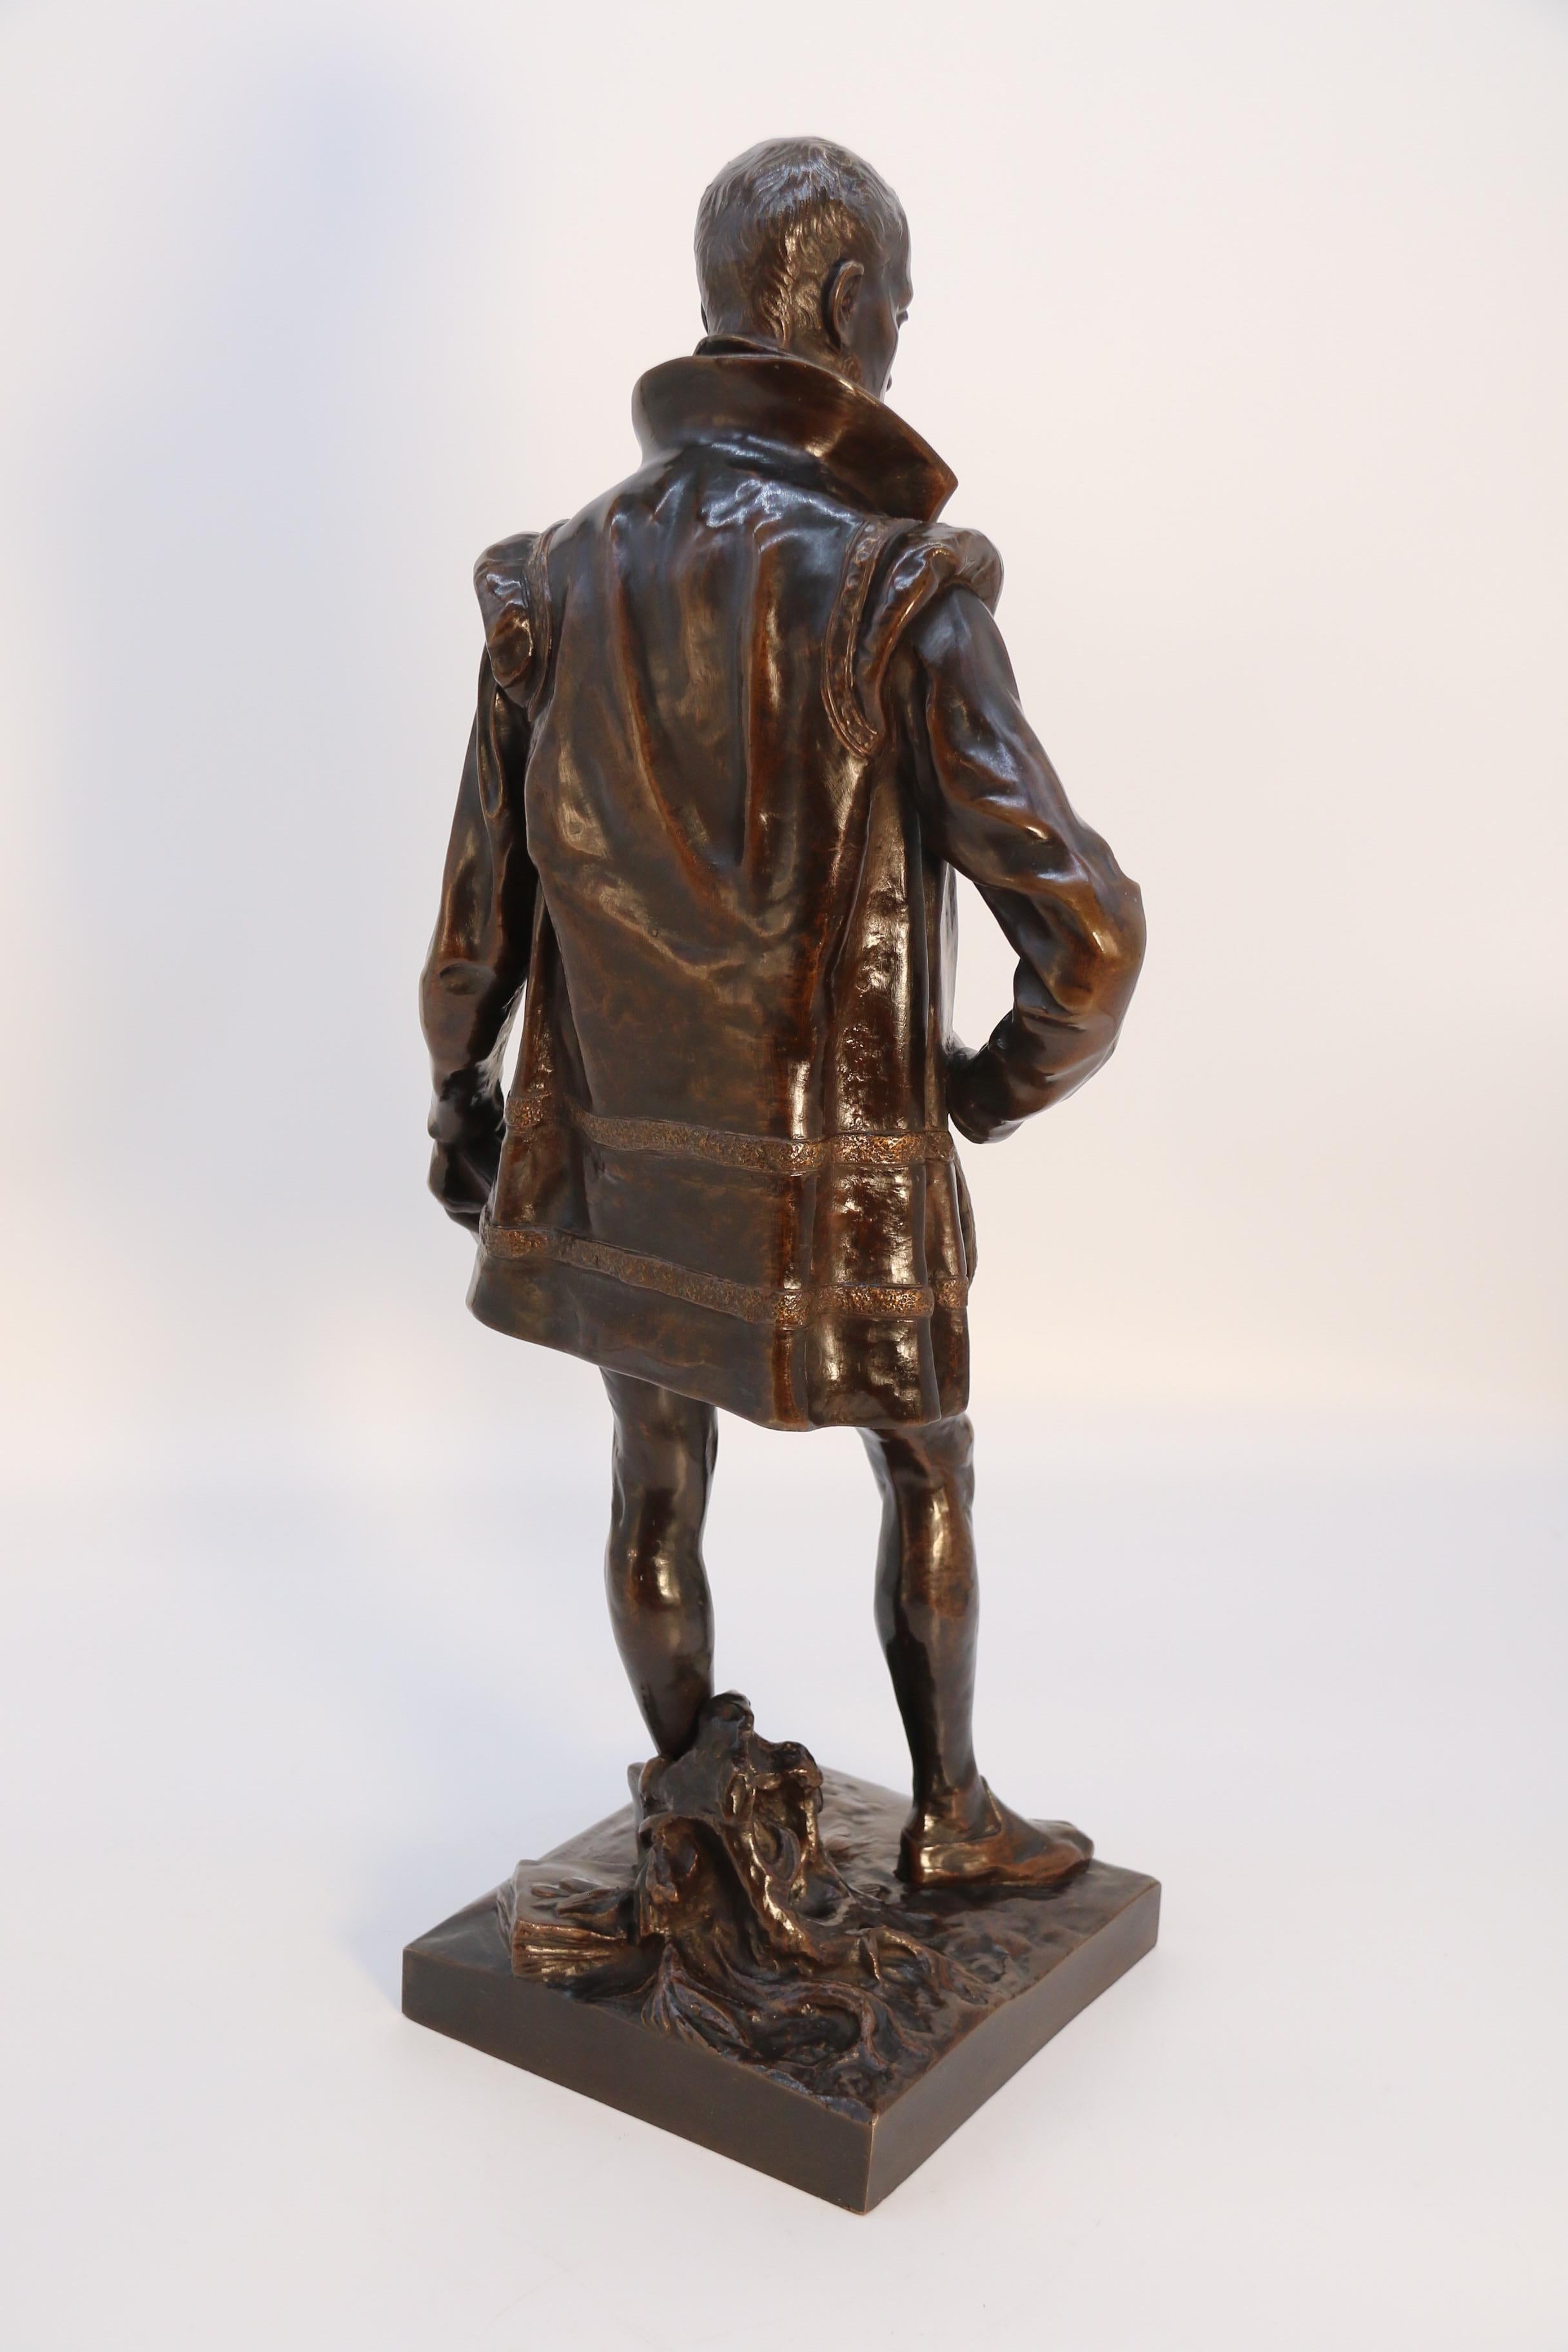 A 19th century bronze study of the French poet Joachim de Bellay by L Adolphe For Sale 1